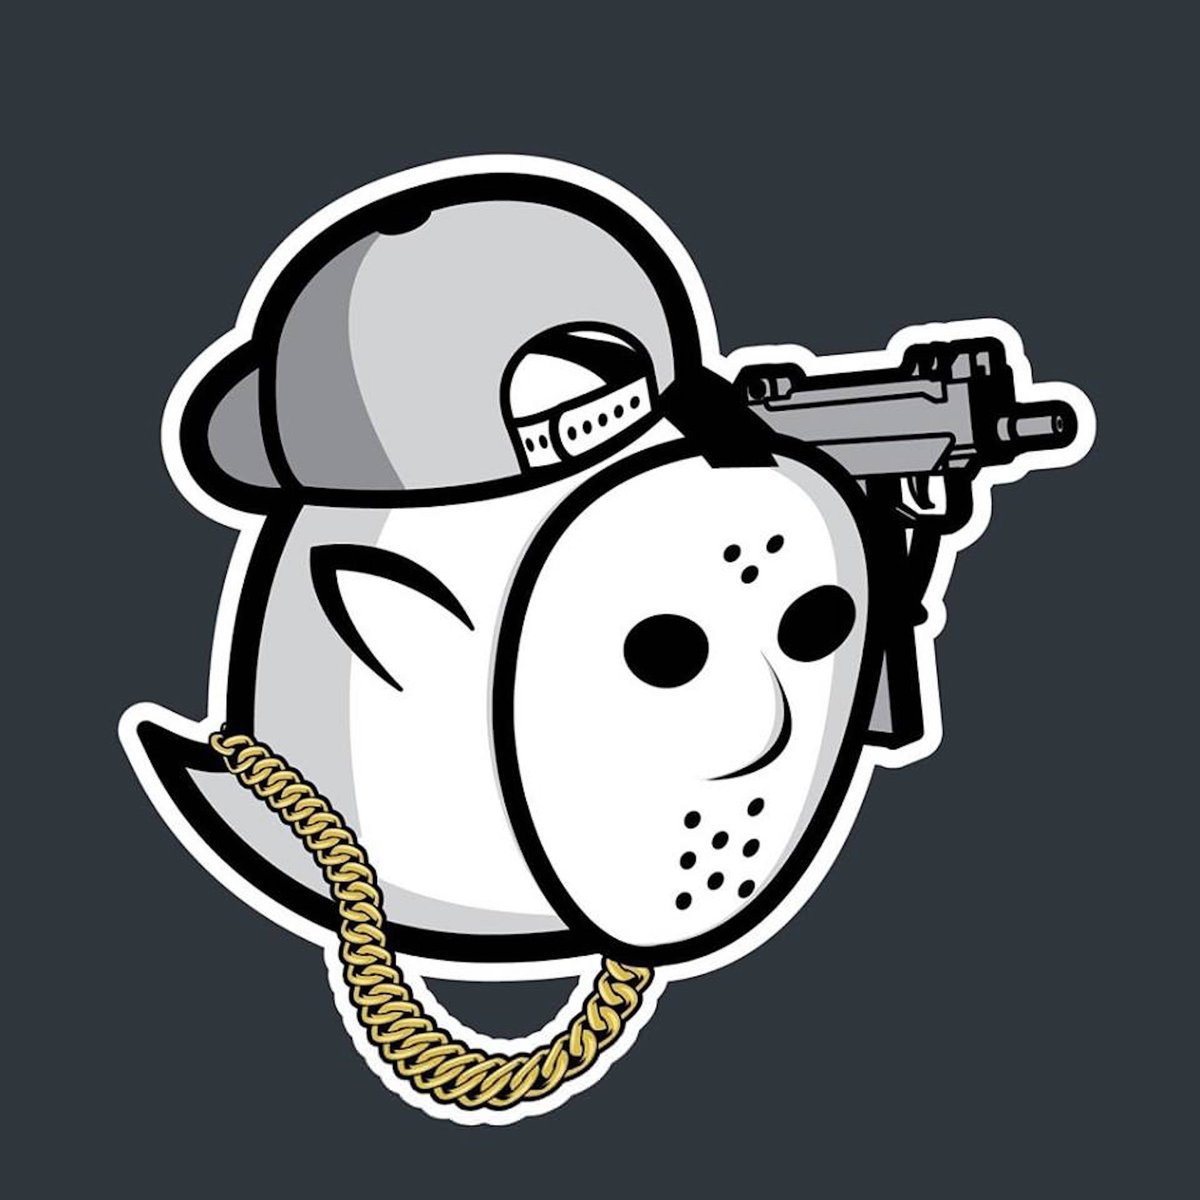 Ghostface Killah – “The Lost Tapes”